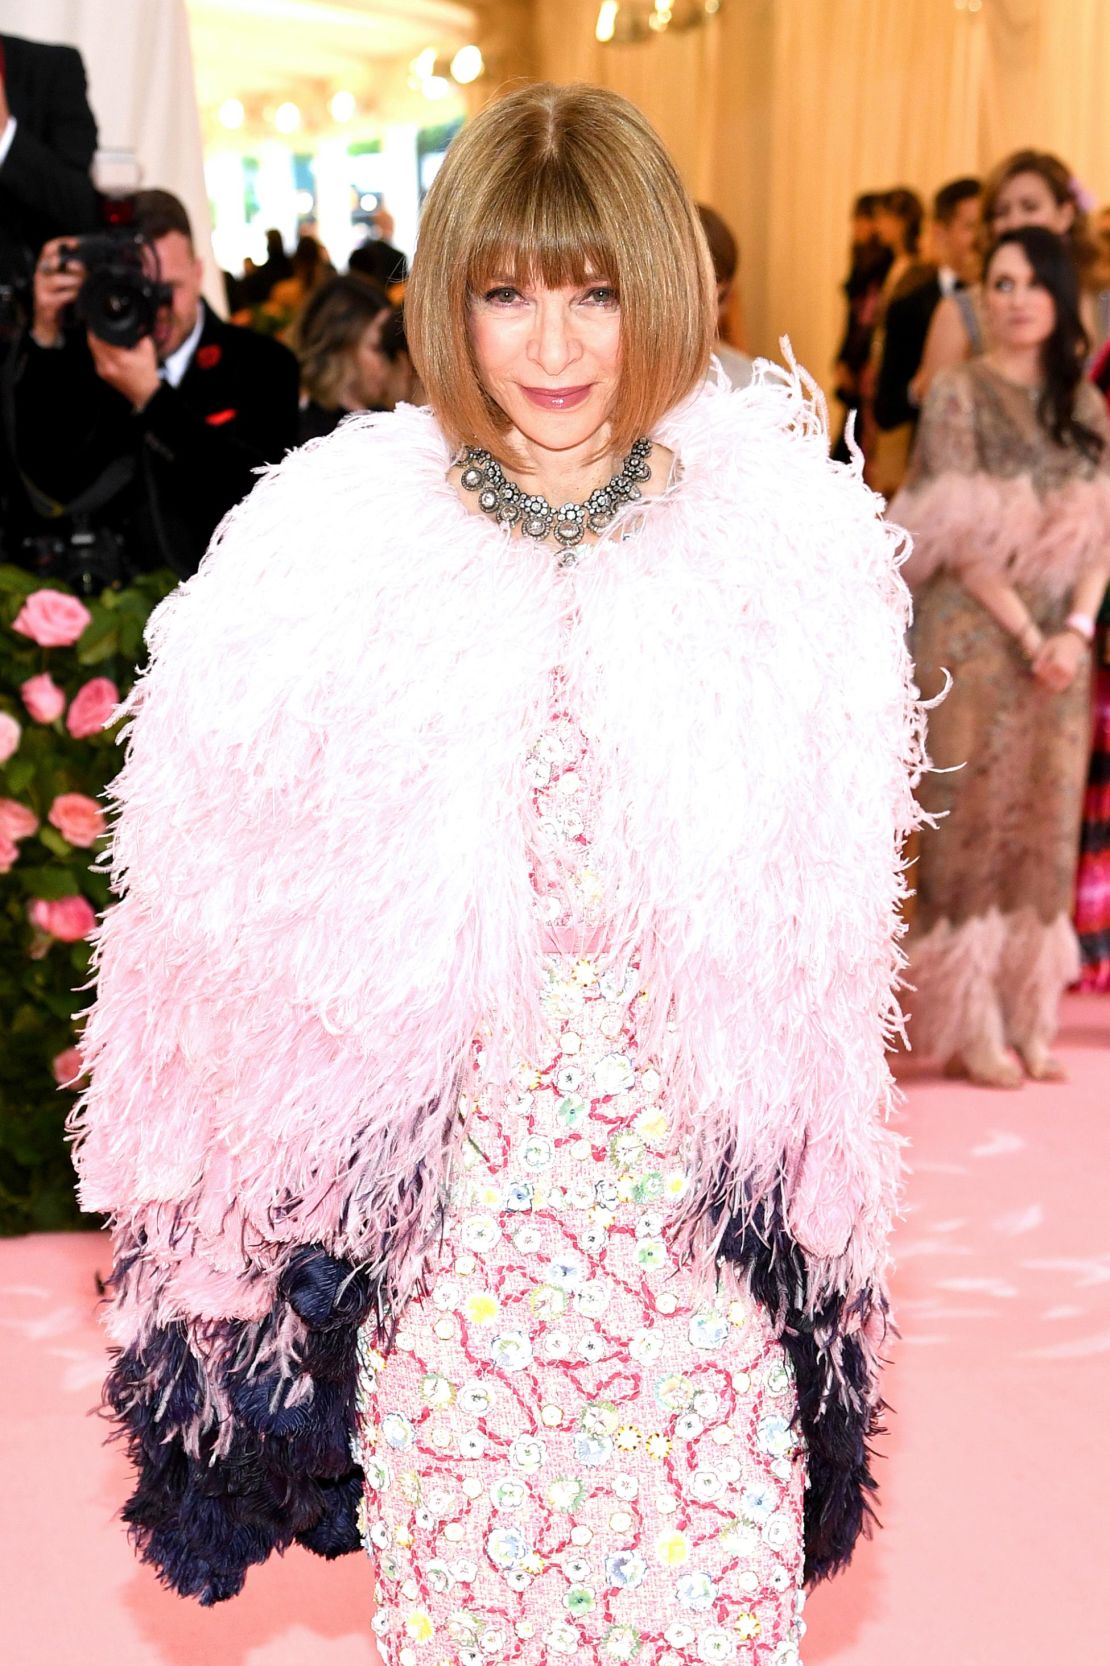 Anna Wintour attends The 2019 Met Gala Celebrating Camp: Notes on Fashion.